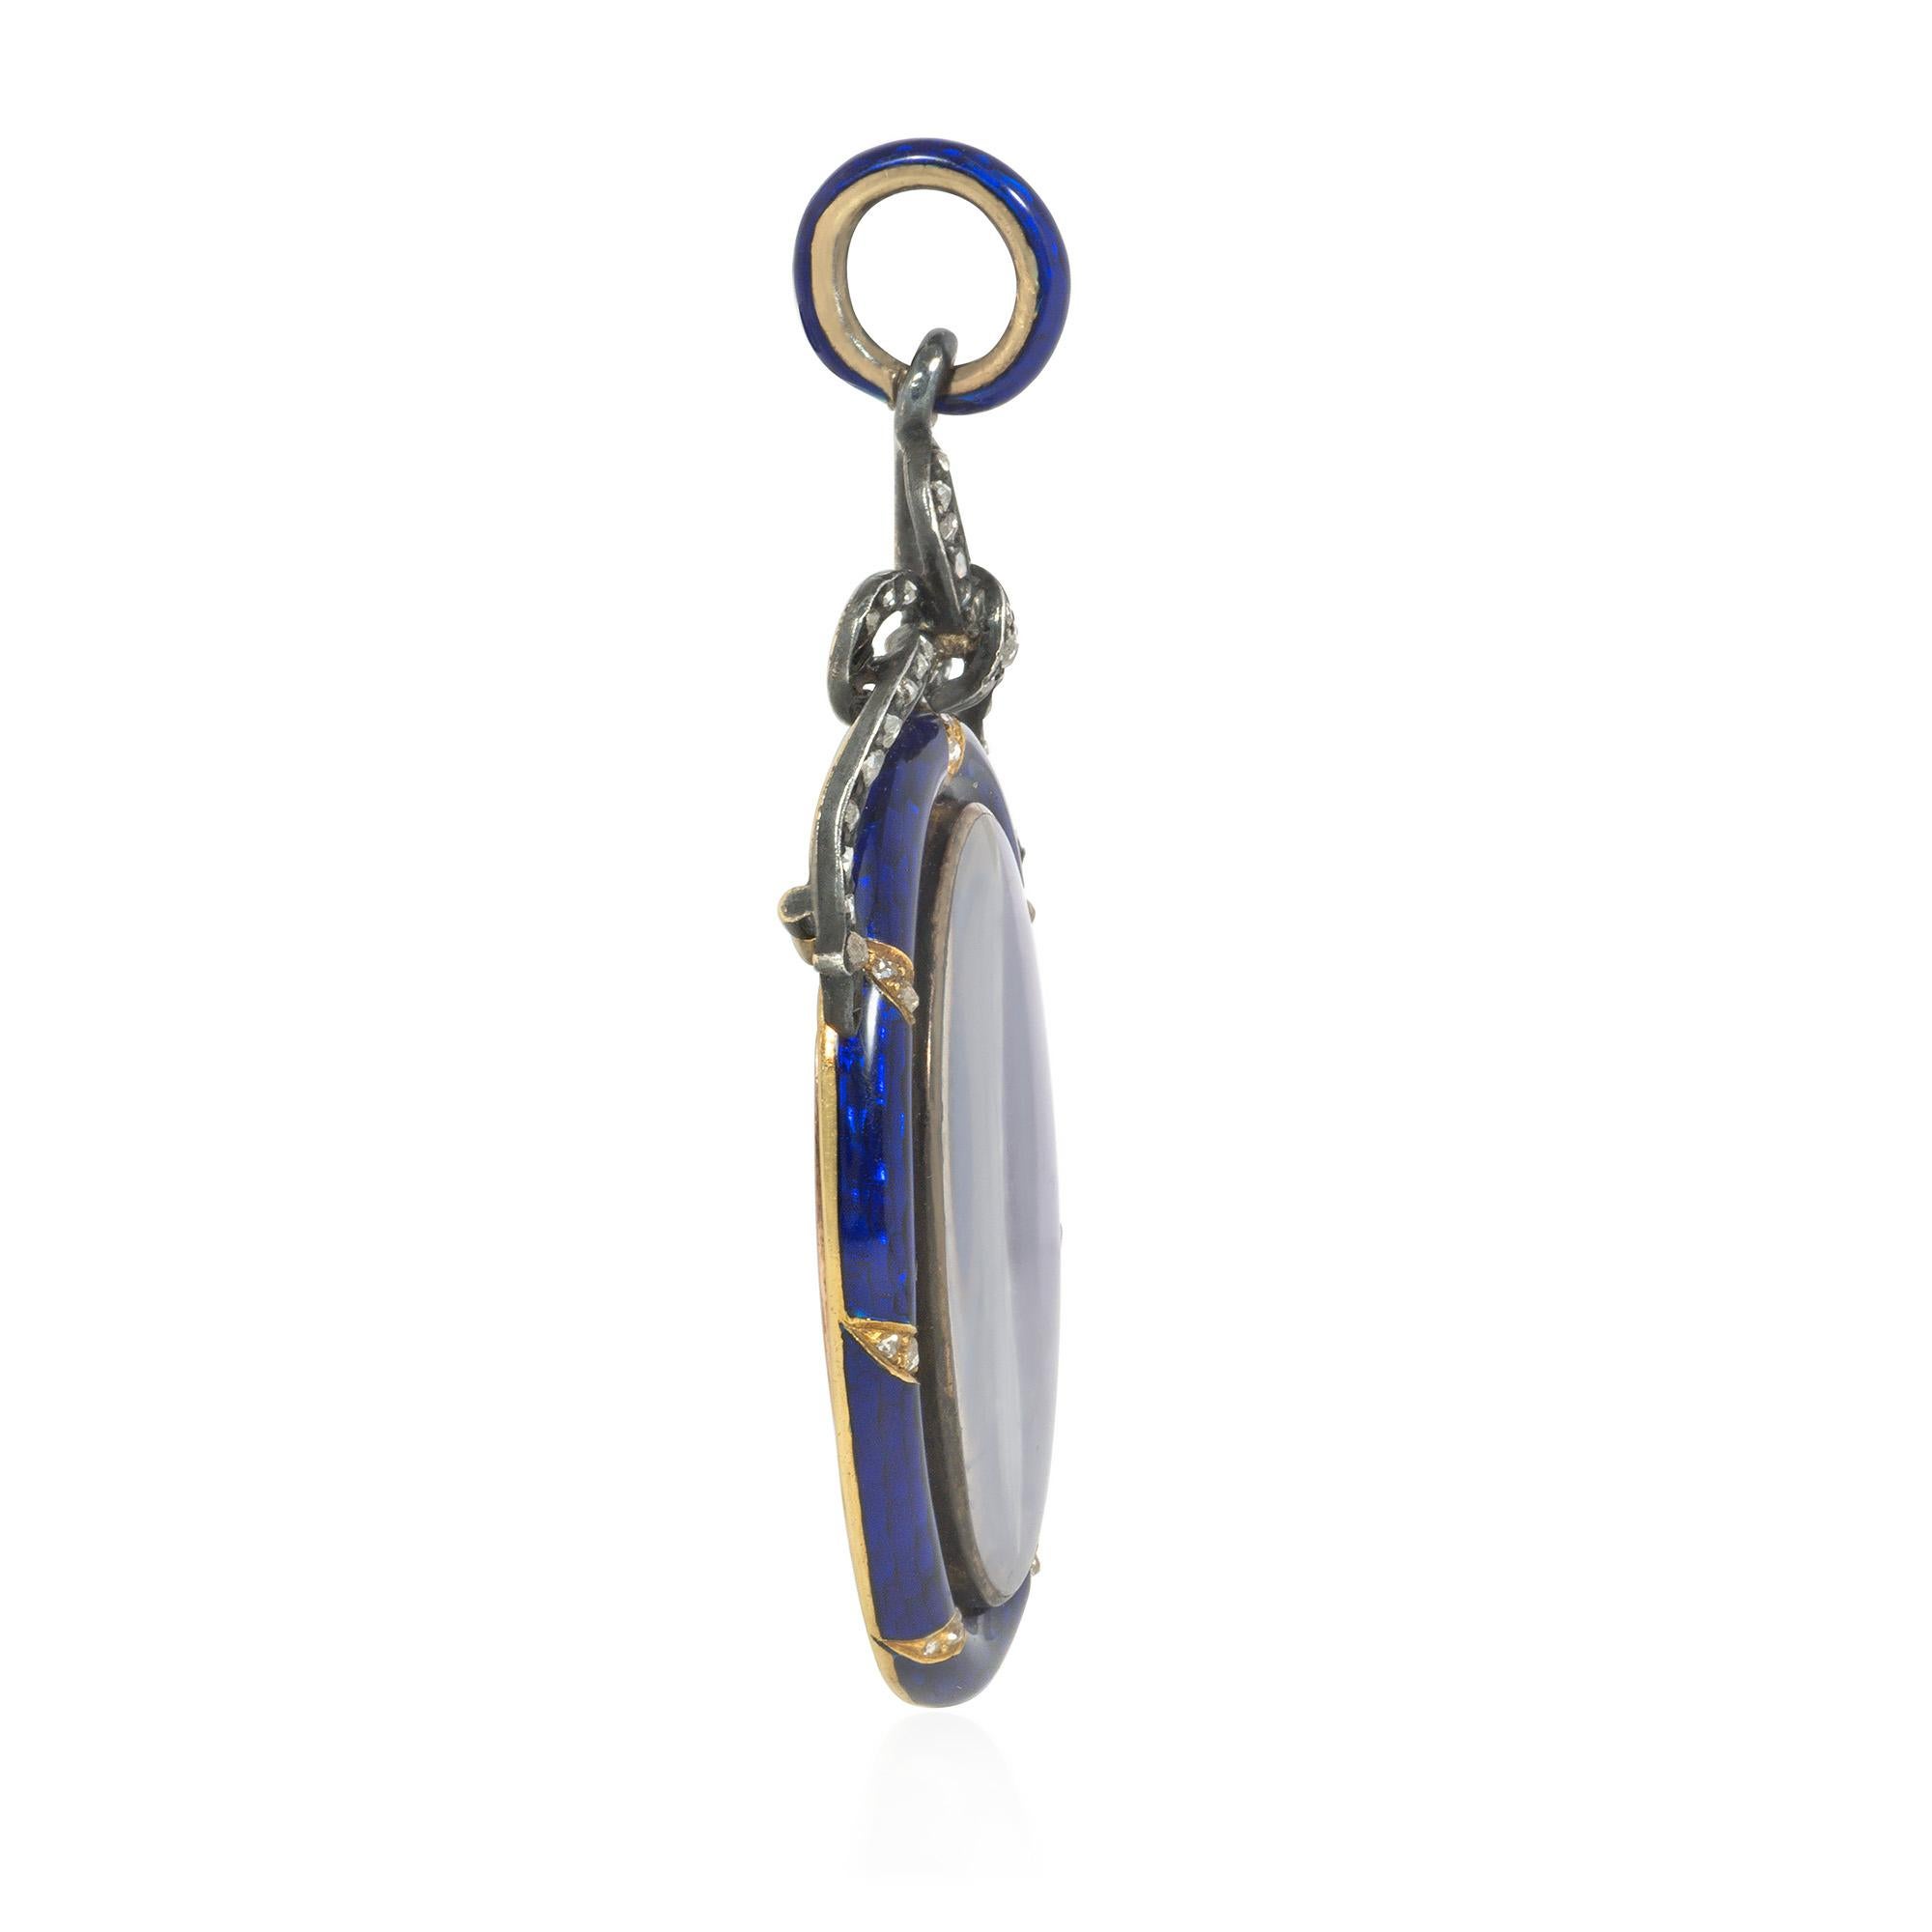 An antique Victorian period blue enamel, diamond, and gold locket pendant centered by an oval picture glass in a blue enamel border adorned with gold and diamond gadroons, topped by a silver bow set with rose-cut diamonds and suspended from a blue